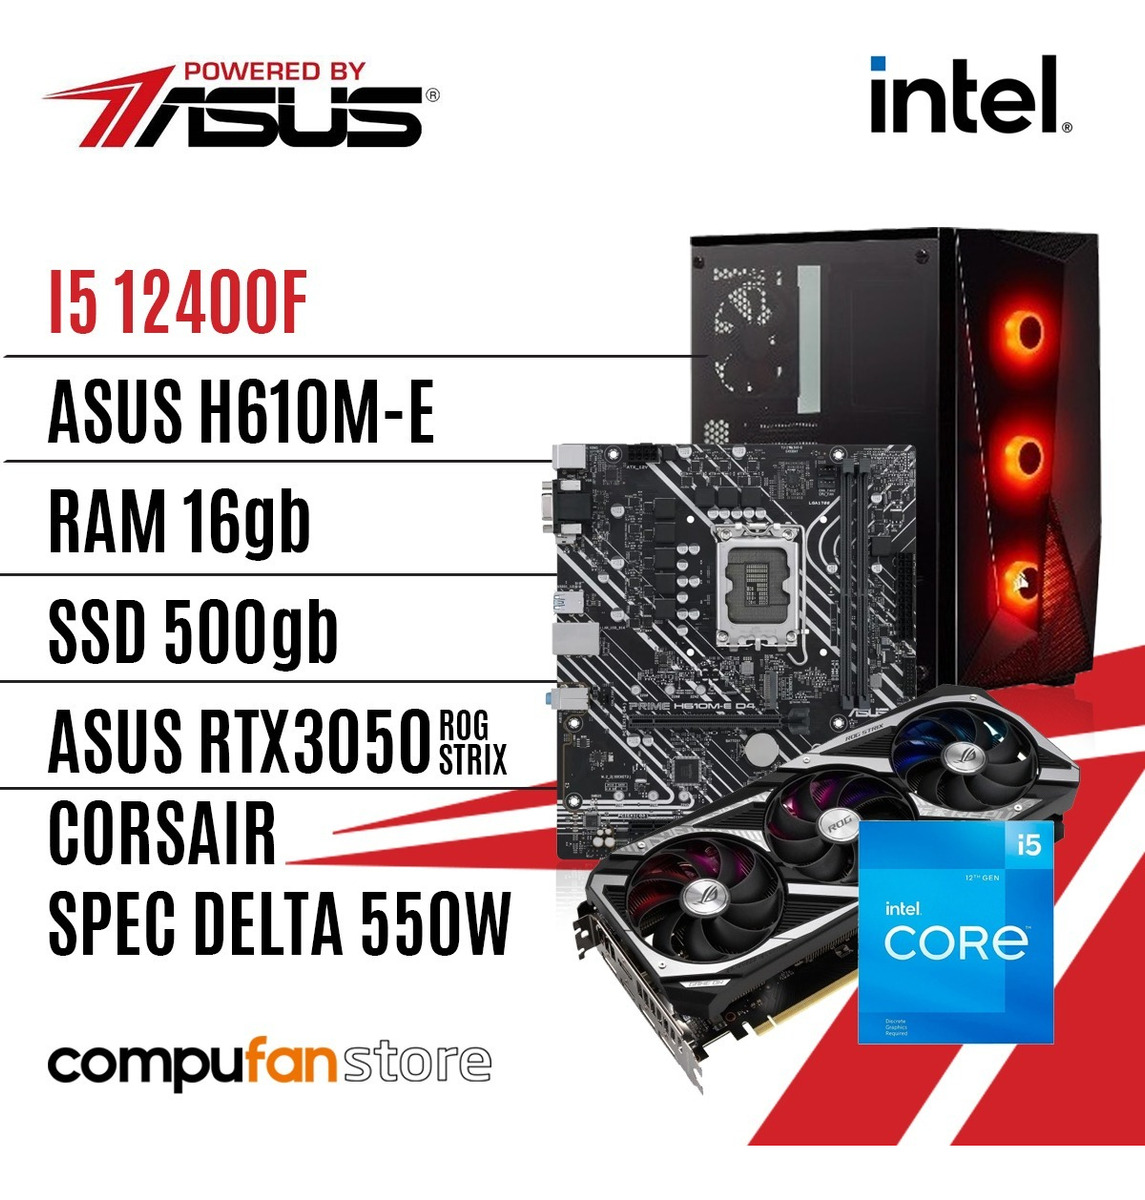 Pc Gamer Powered By Asus Intel I5 12400f Rtx 3050 